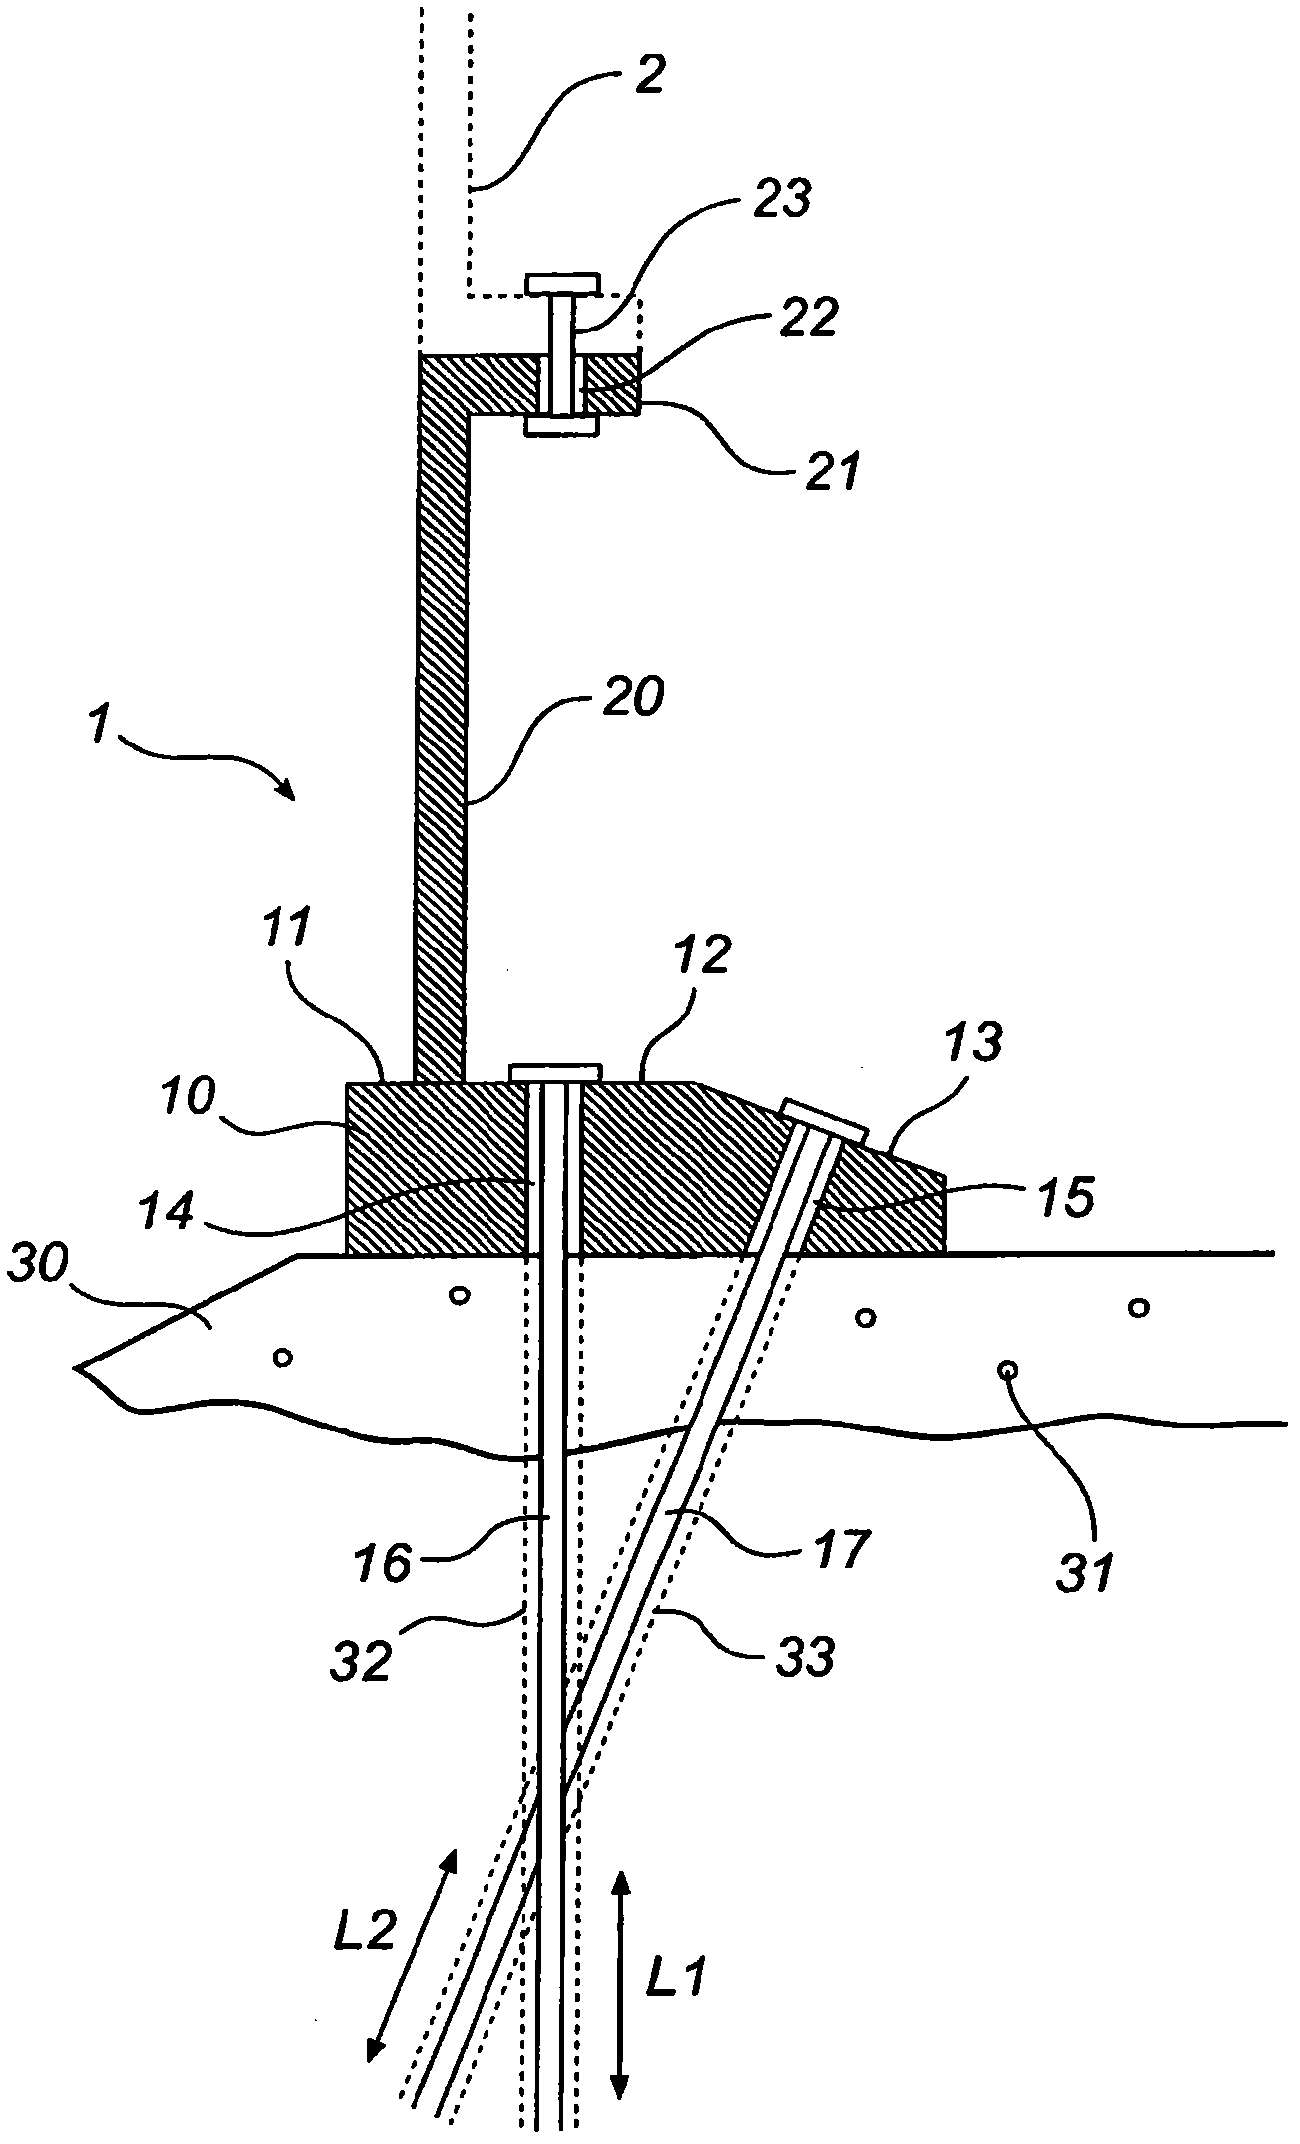 A foundation and a method for forming a foundation for a wind turbine tower